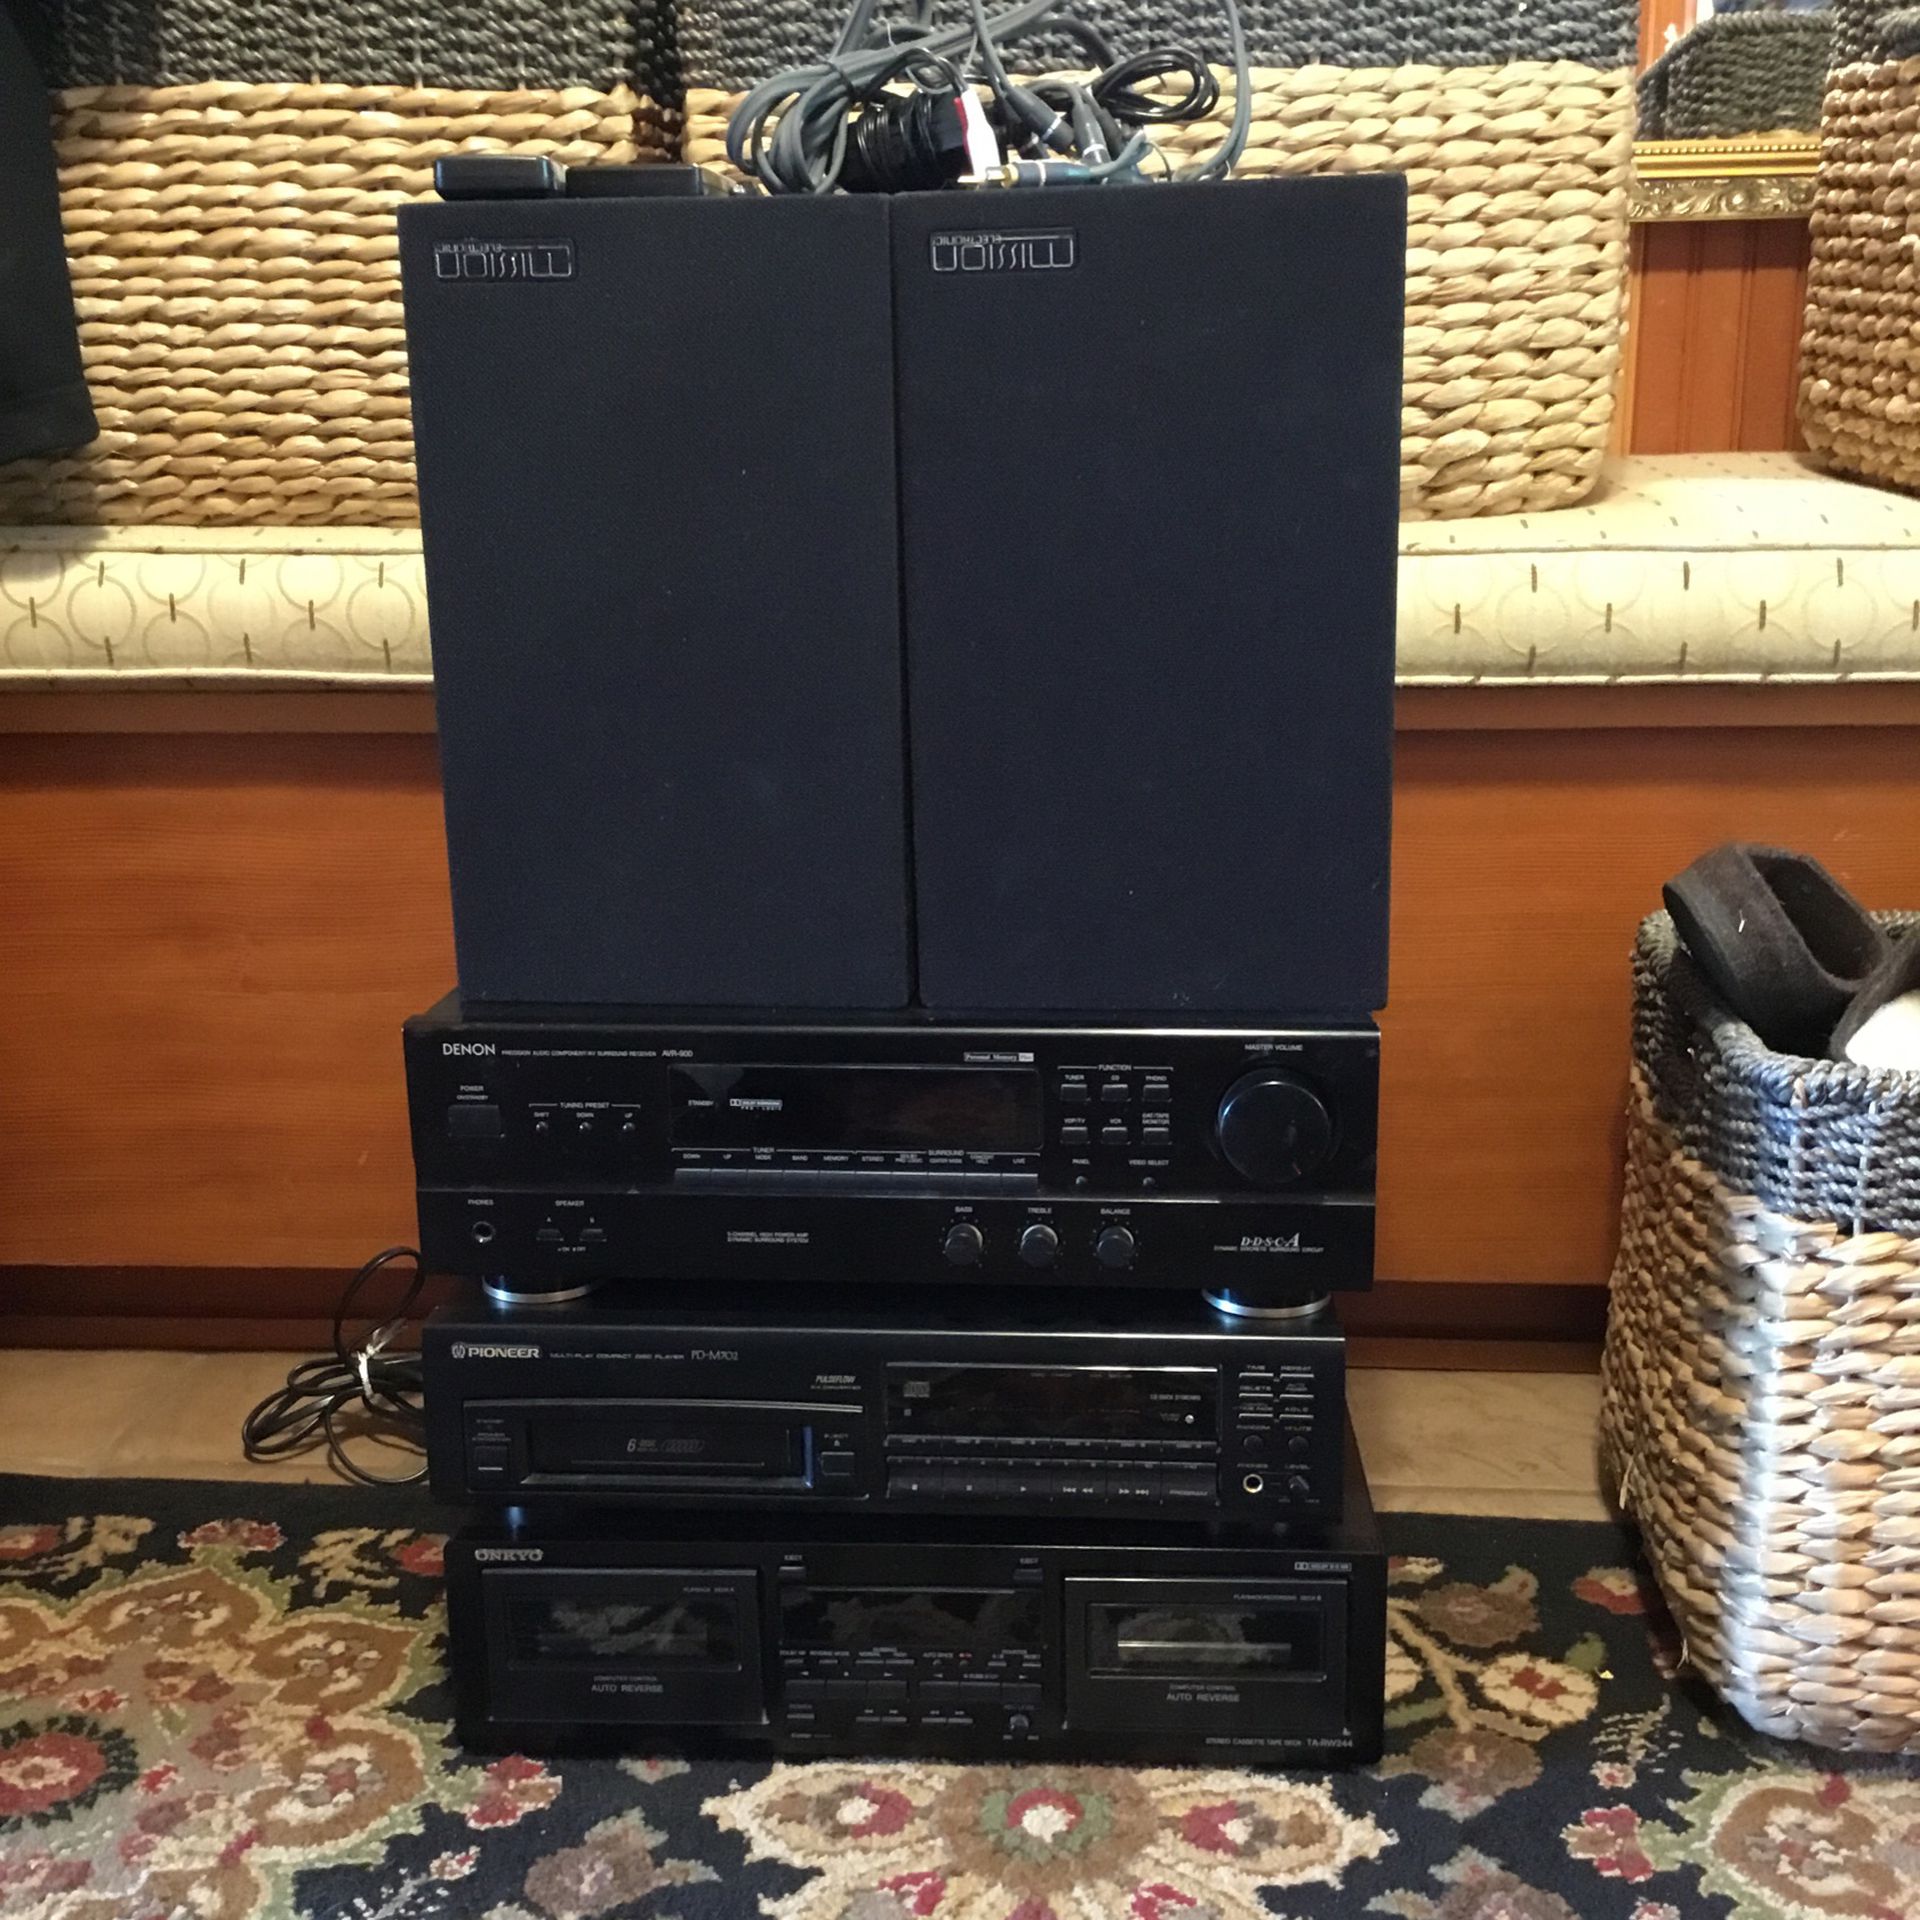 Stereo System-Denon Receiver, Onkyo Dual Cassette Player, Pioneer Compact Disc Player, 2 Mission Electronic Speakers